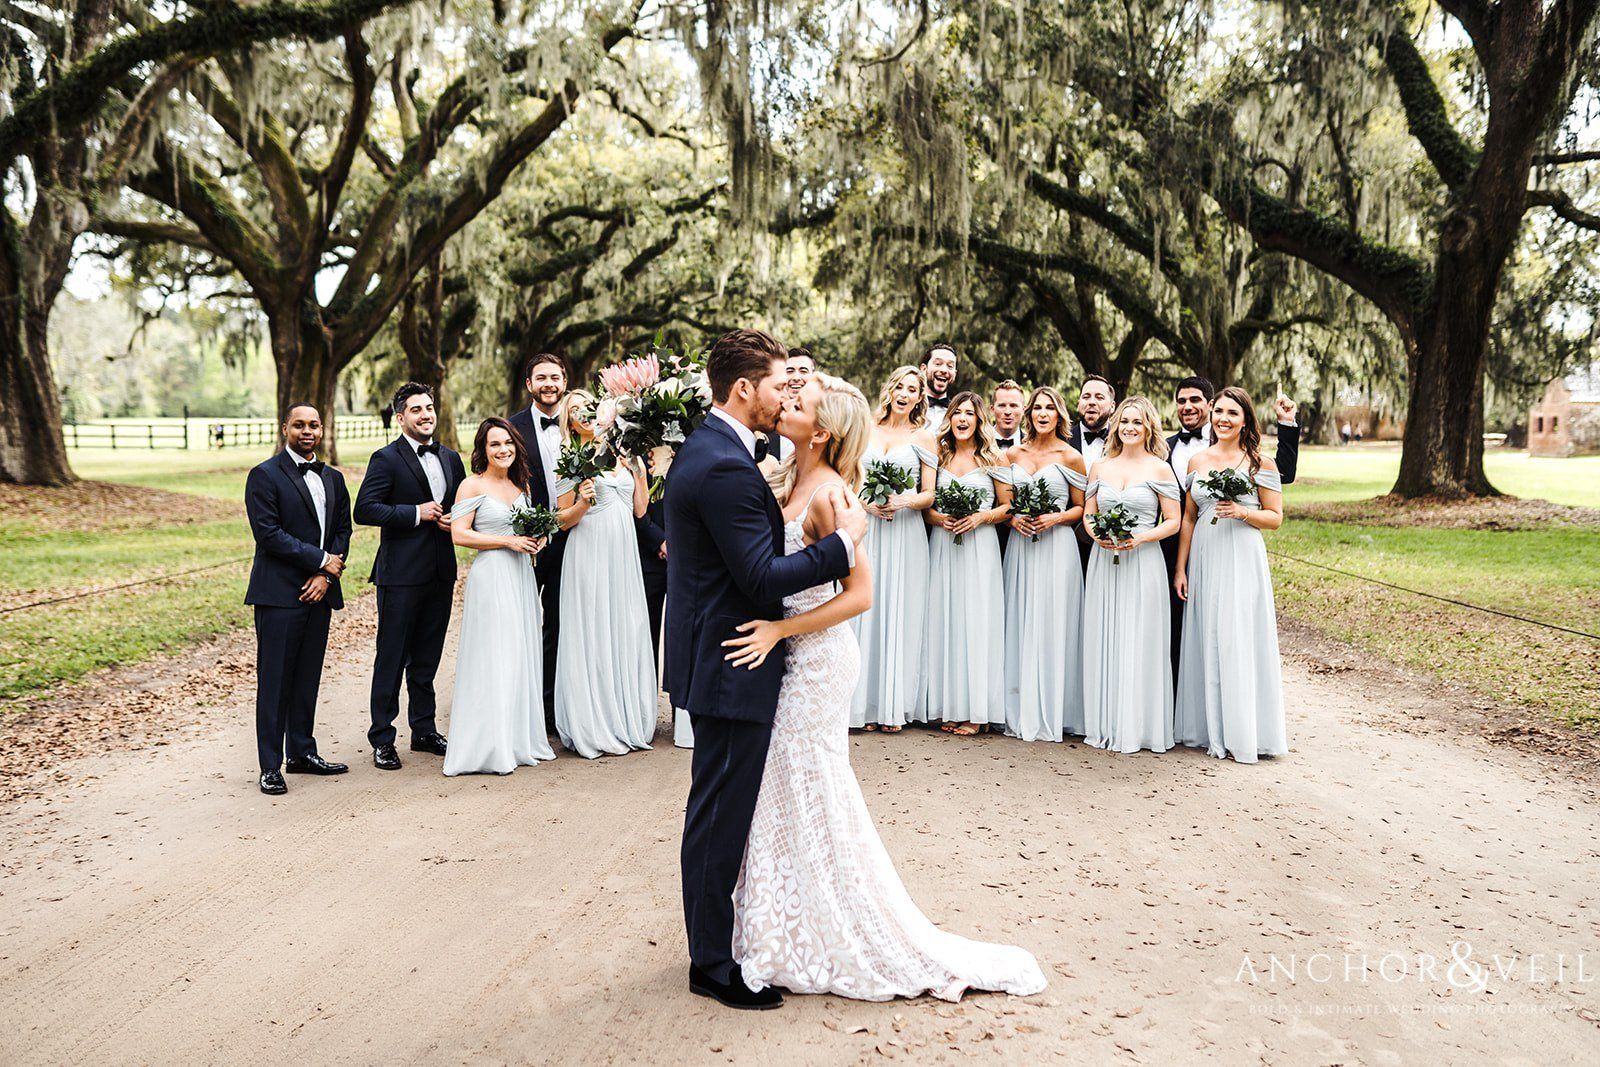 The Bride and Groom kissing in front the wedding party at the Boone Hall Plantation Wedding